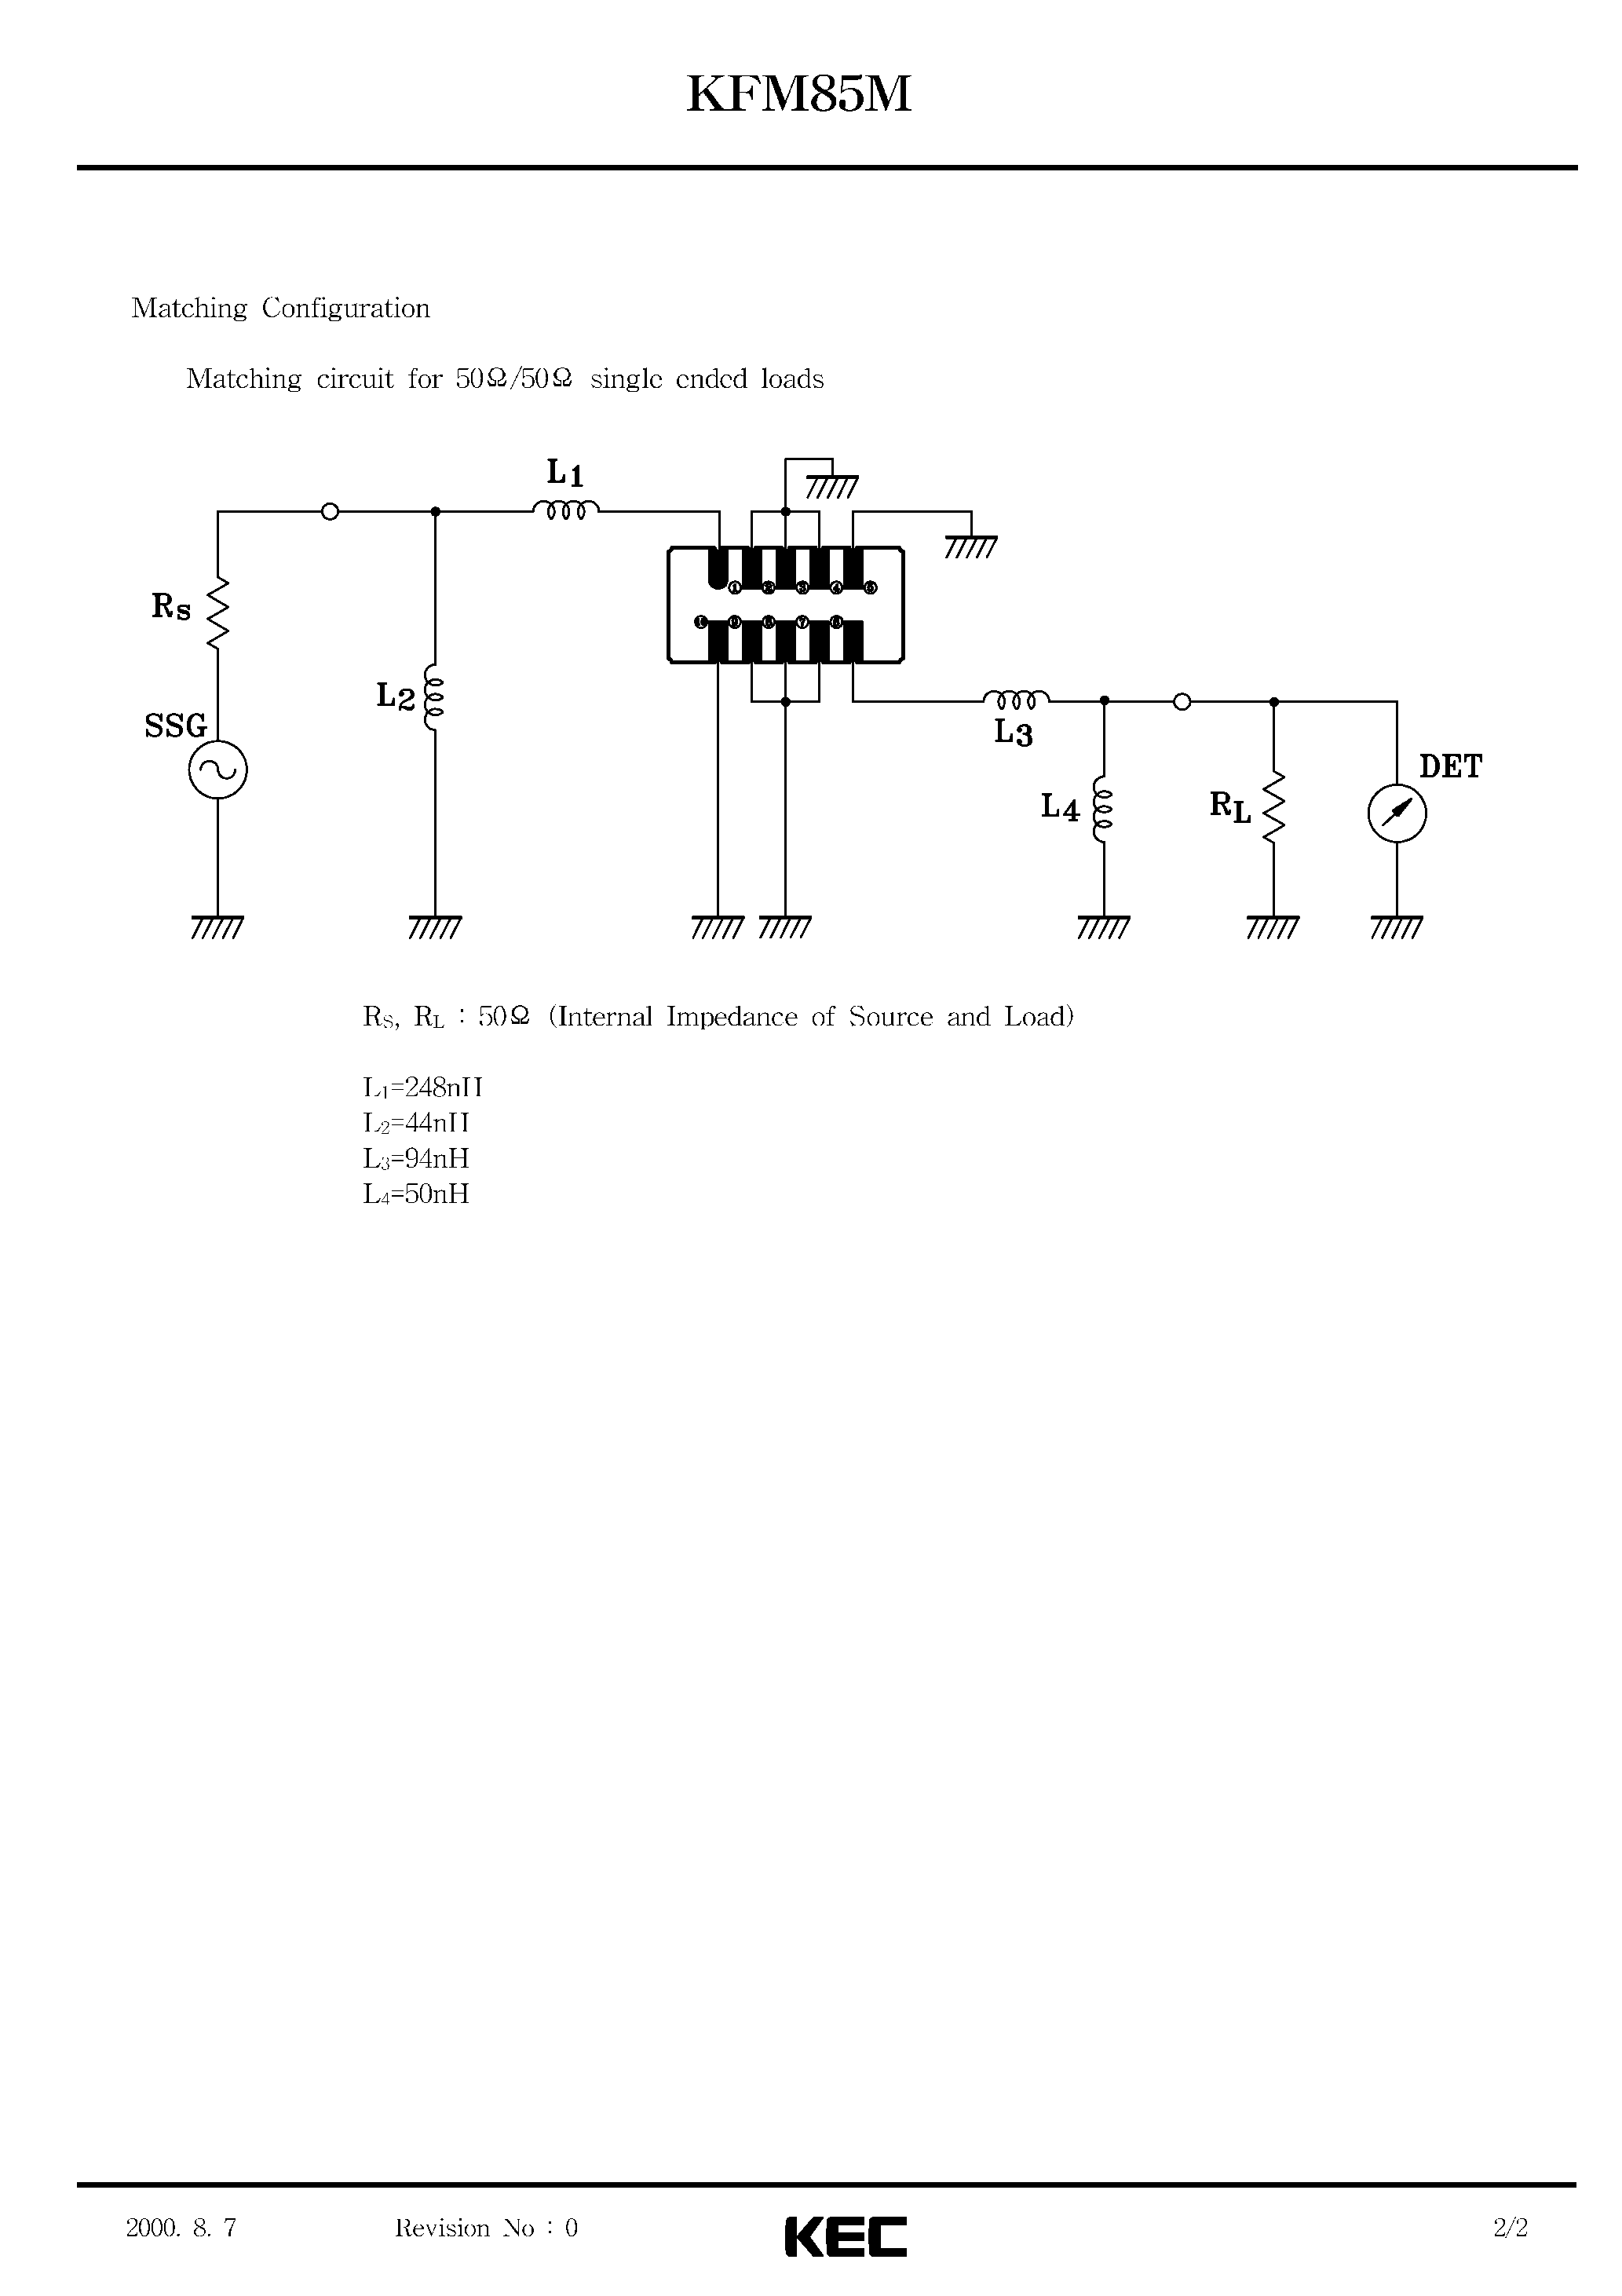 Datasheet KFM85M - SPECIFICATIONS FOR SAW FILTER(BAND PASS FILTERS FOR CDMA IF STAGE) page 2